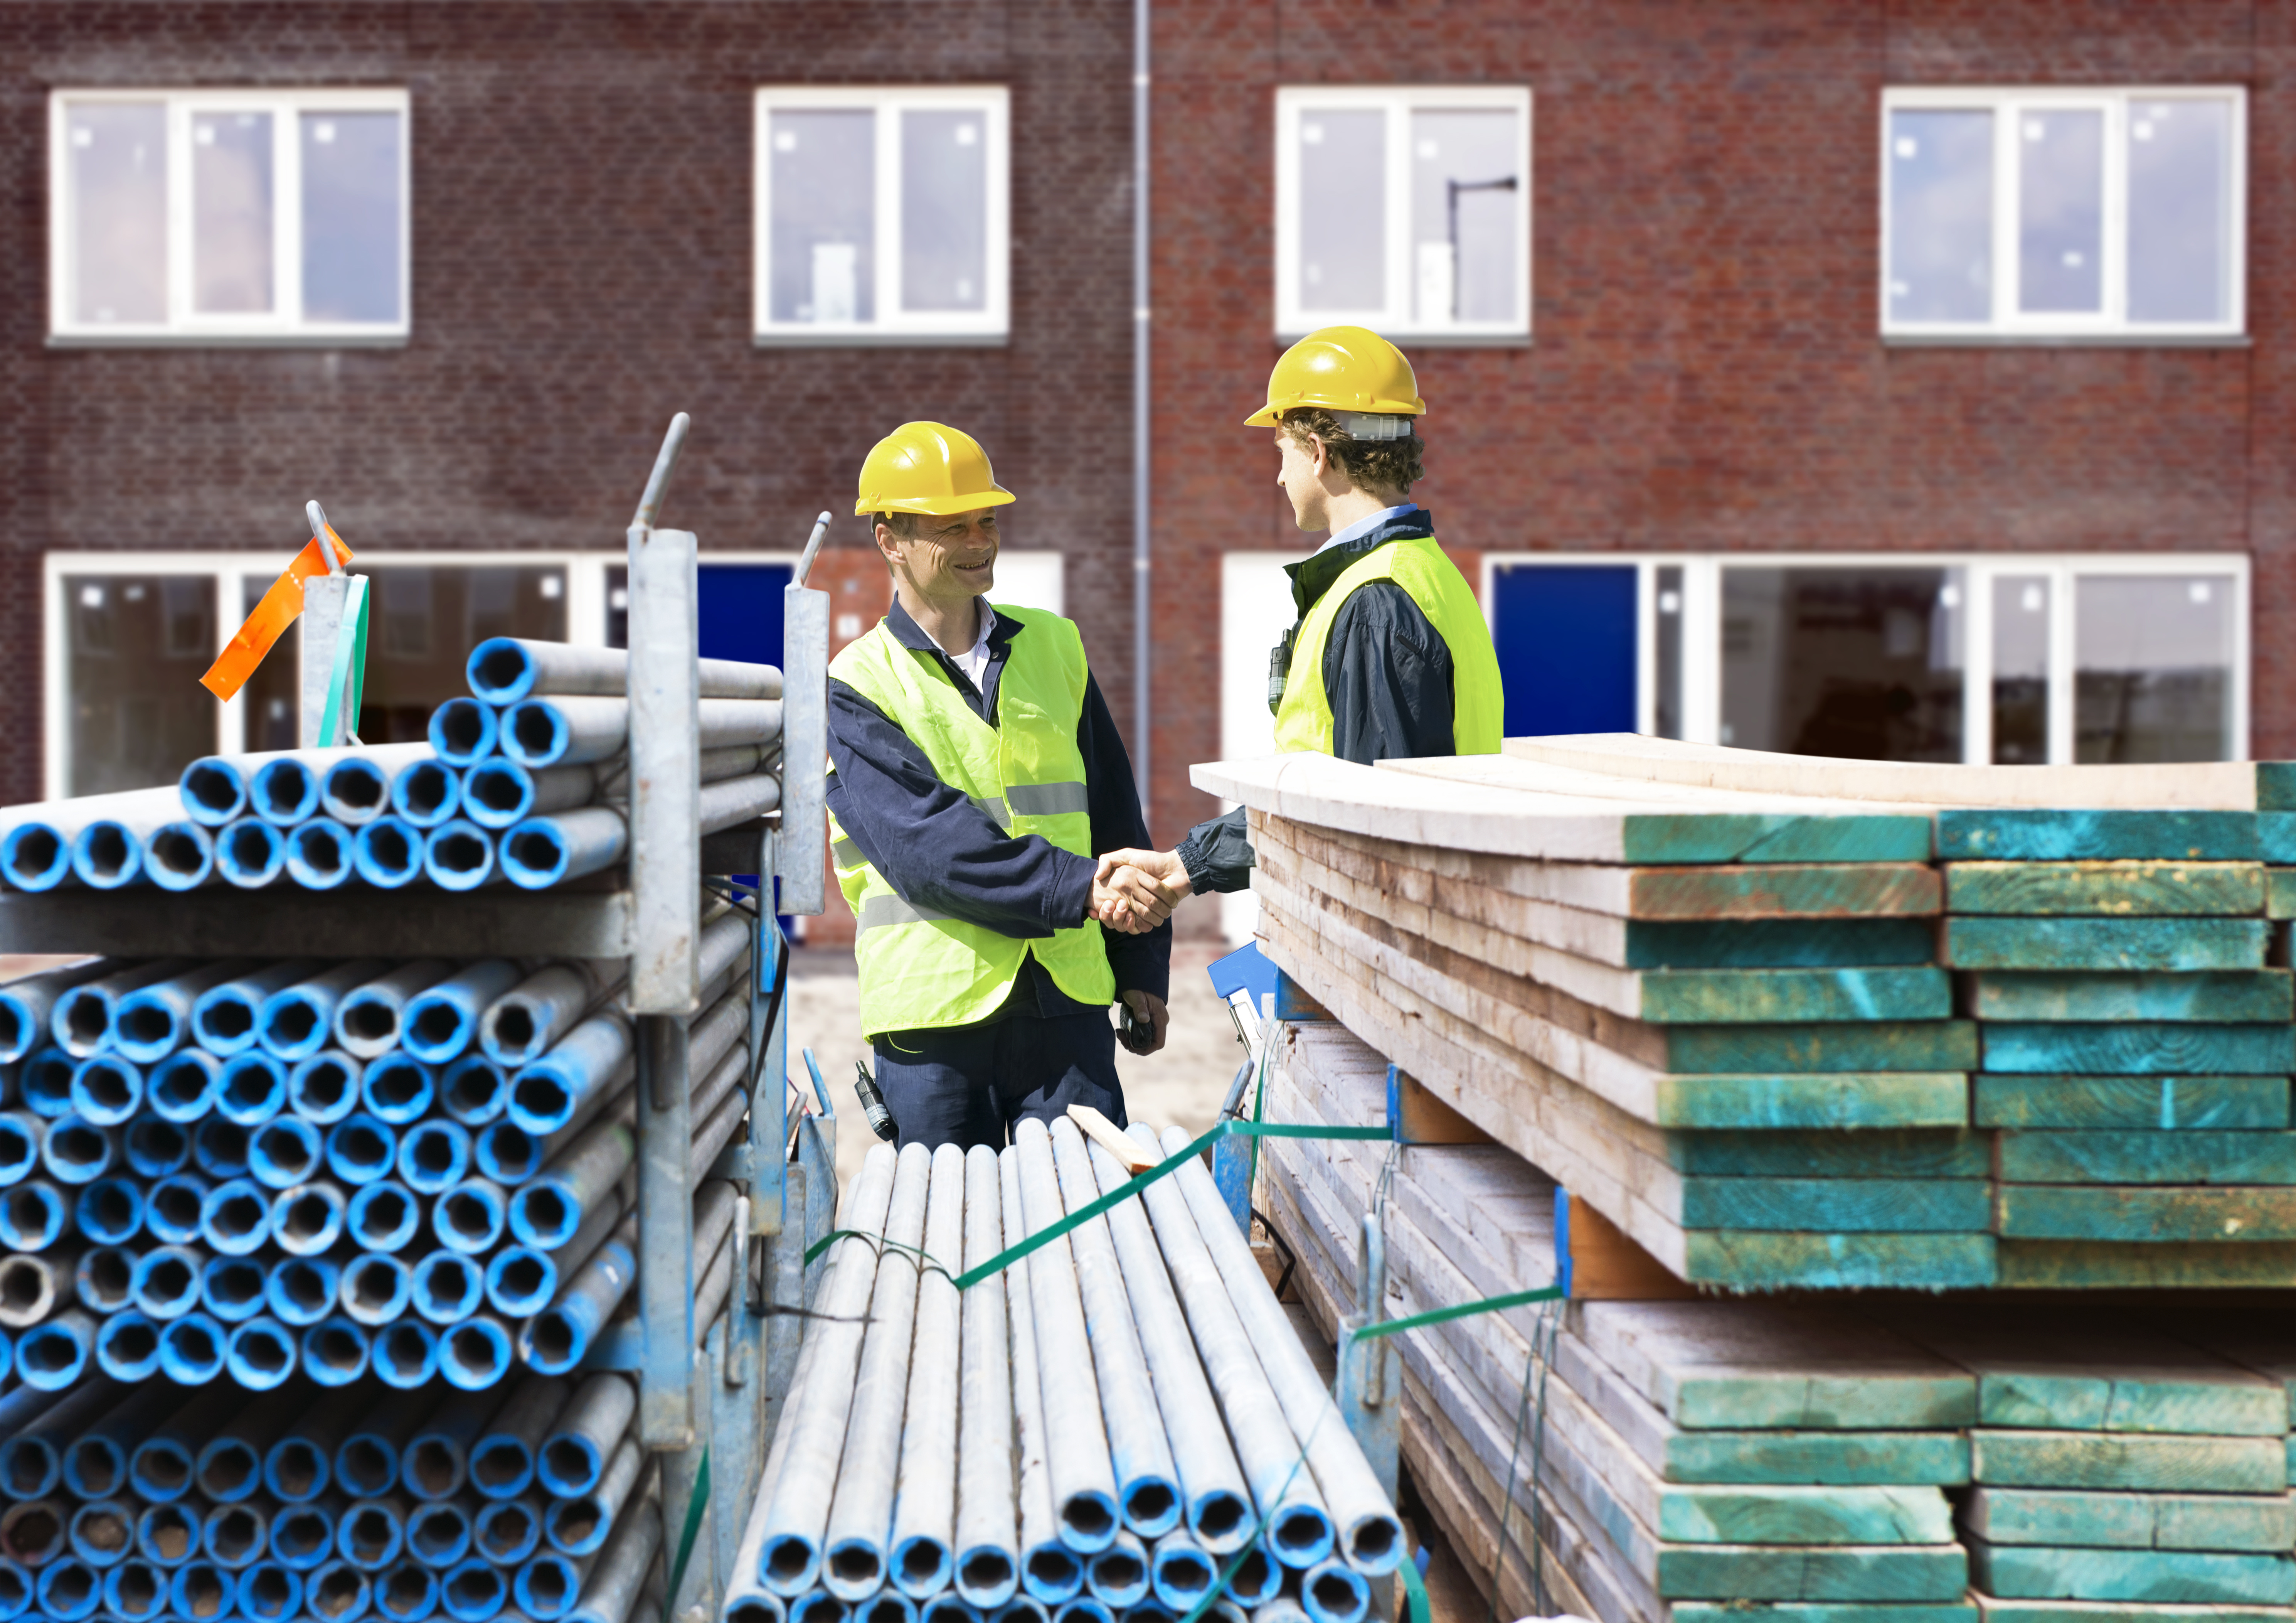 Two building contractors shaking hands behind stacks of scaffolding material, in front of a newly completed residential building complex